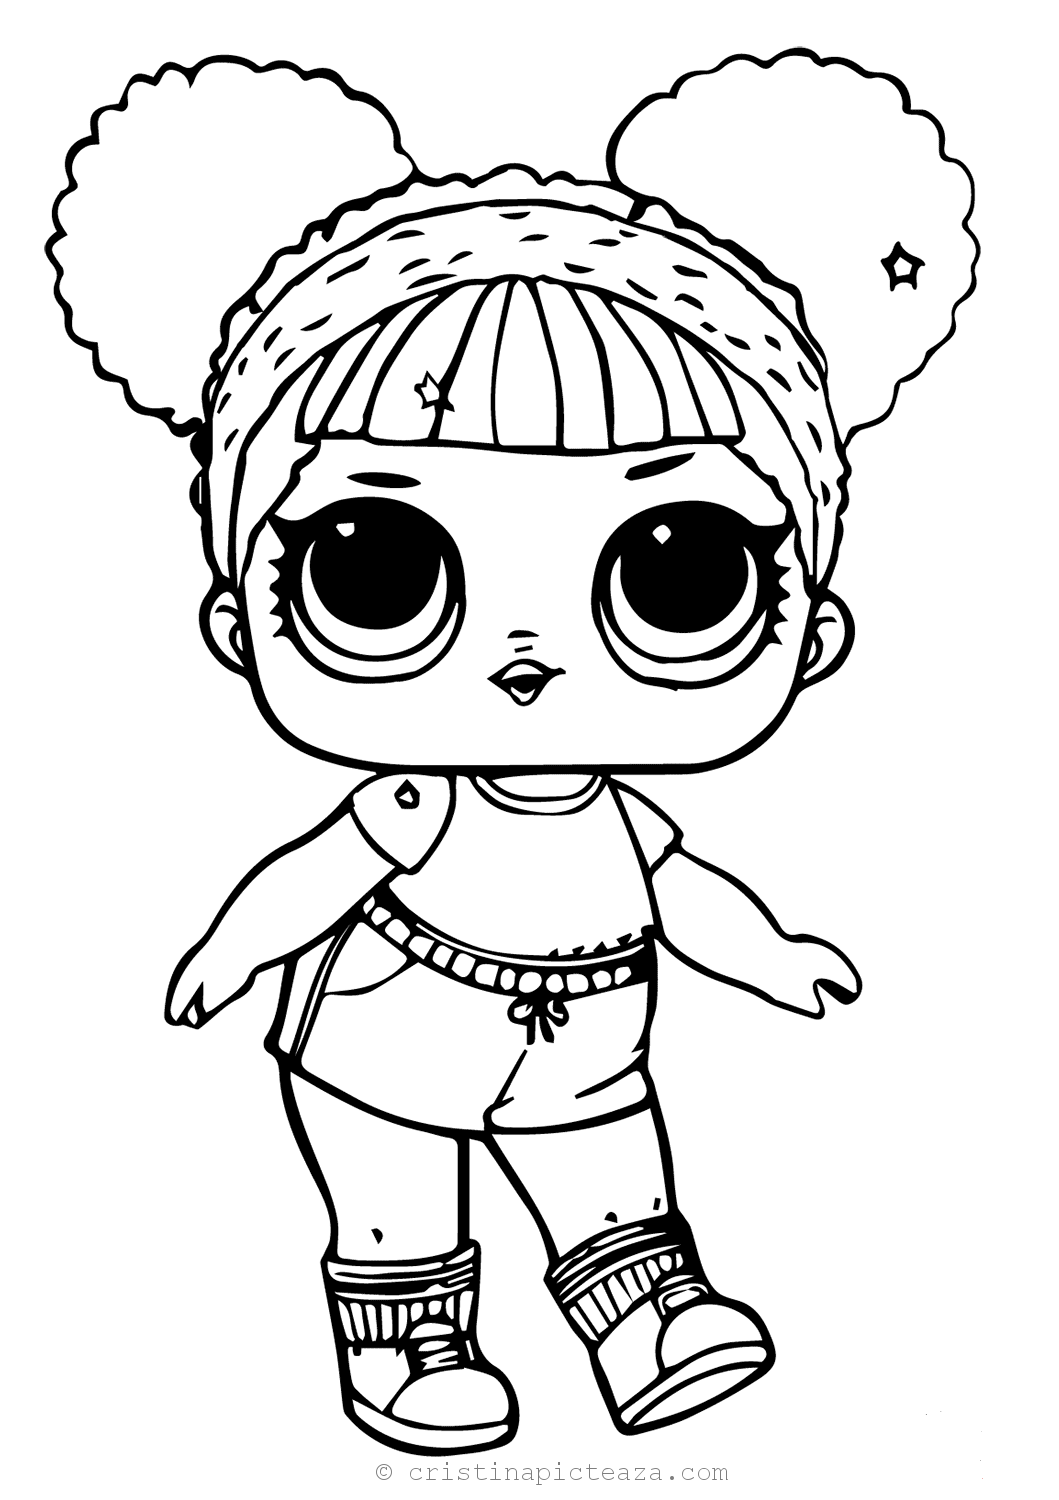 LOL Coloring pages   Lol Dolls for Coloring and Painting